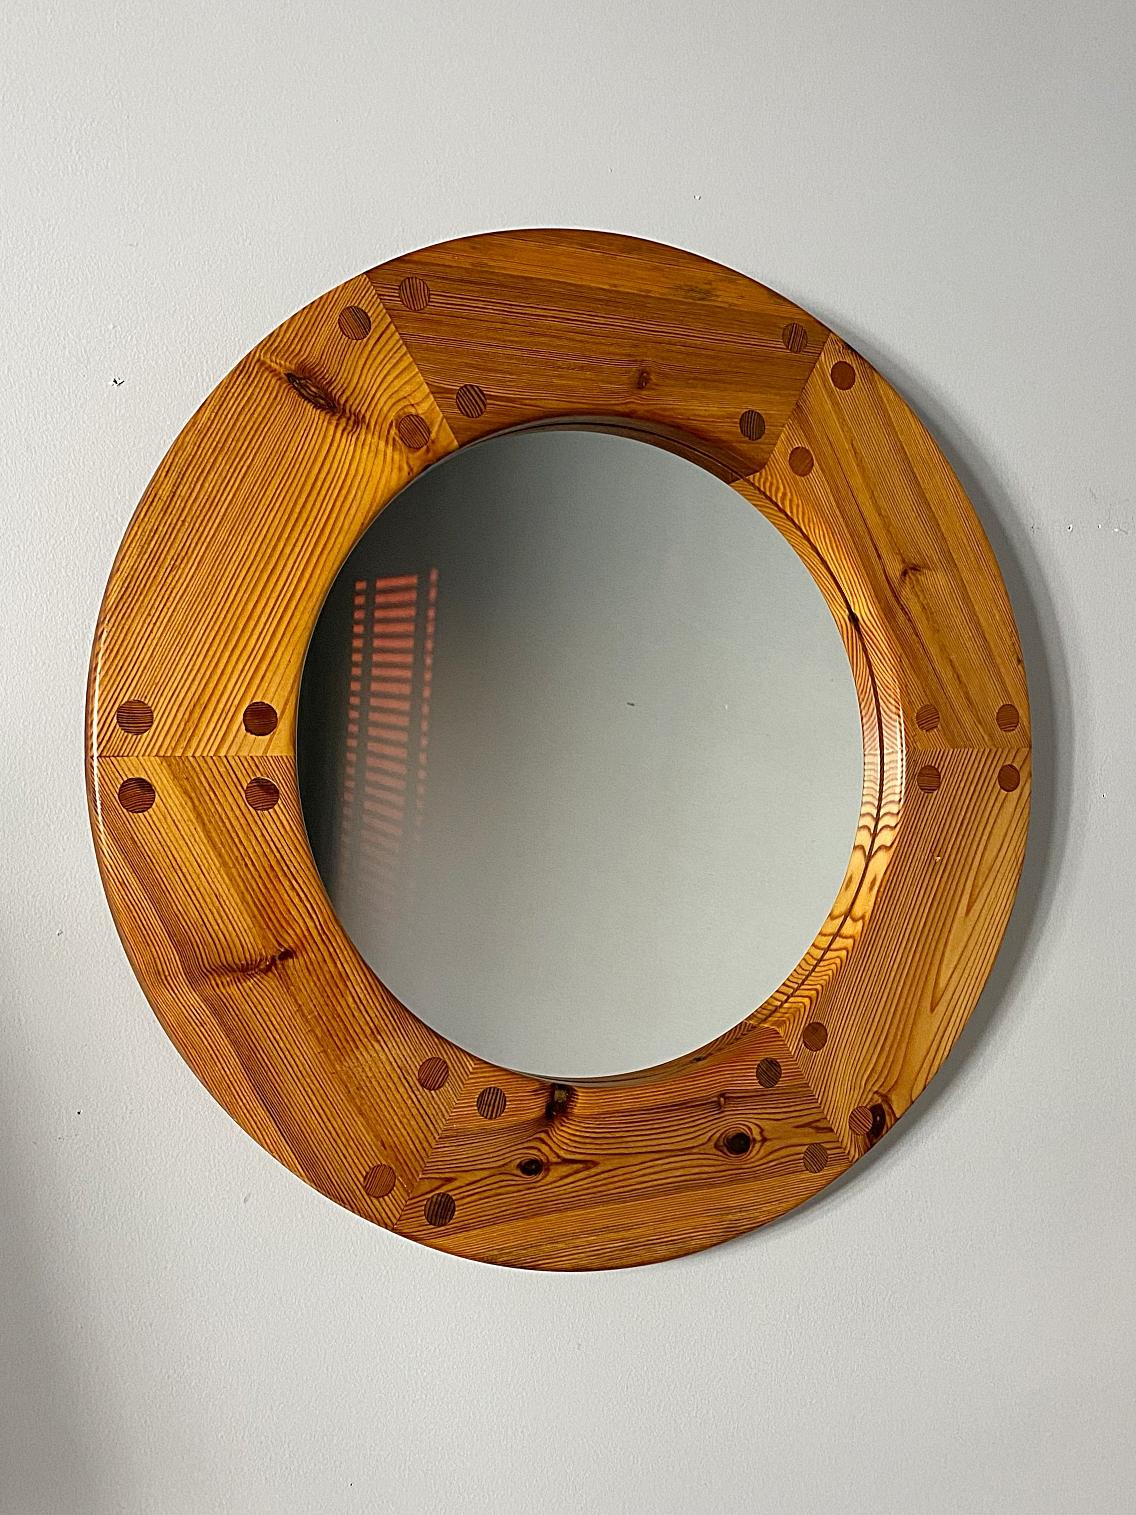 Beautiful round vintage mirror with solid pine wood frame by Uno & Östen Kristiansson for Luxus Vittsjö Möbelfabrik from the 1950s, Sweden. Massive frame around with decorative integrated wooden nails. The mirror is in very good condition.
We love